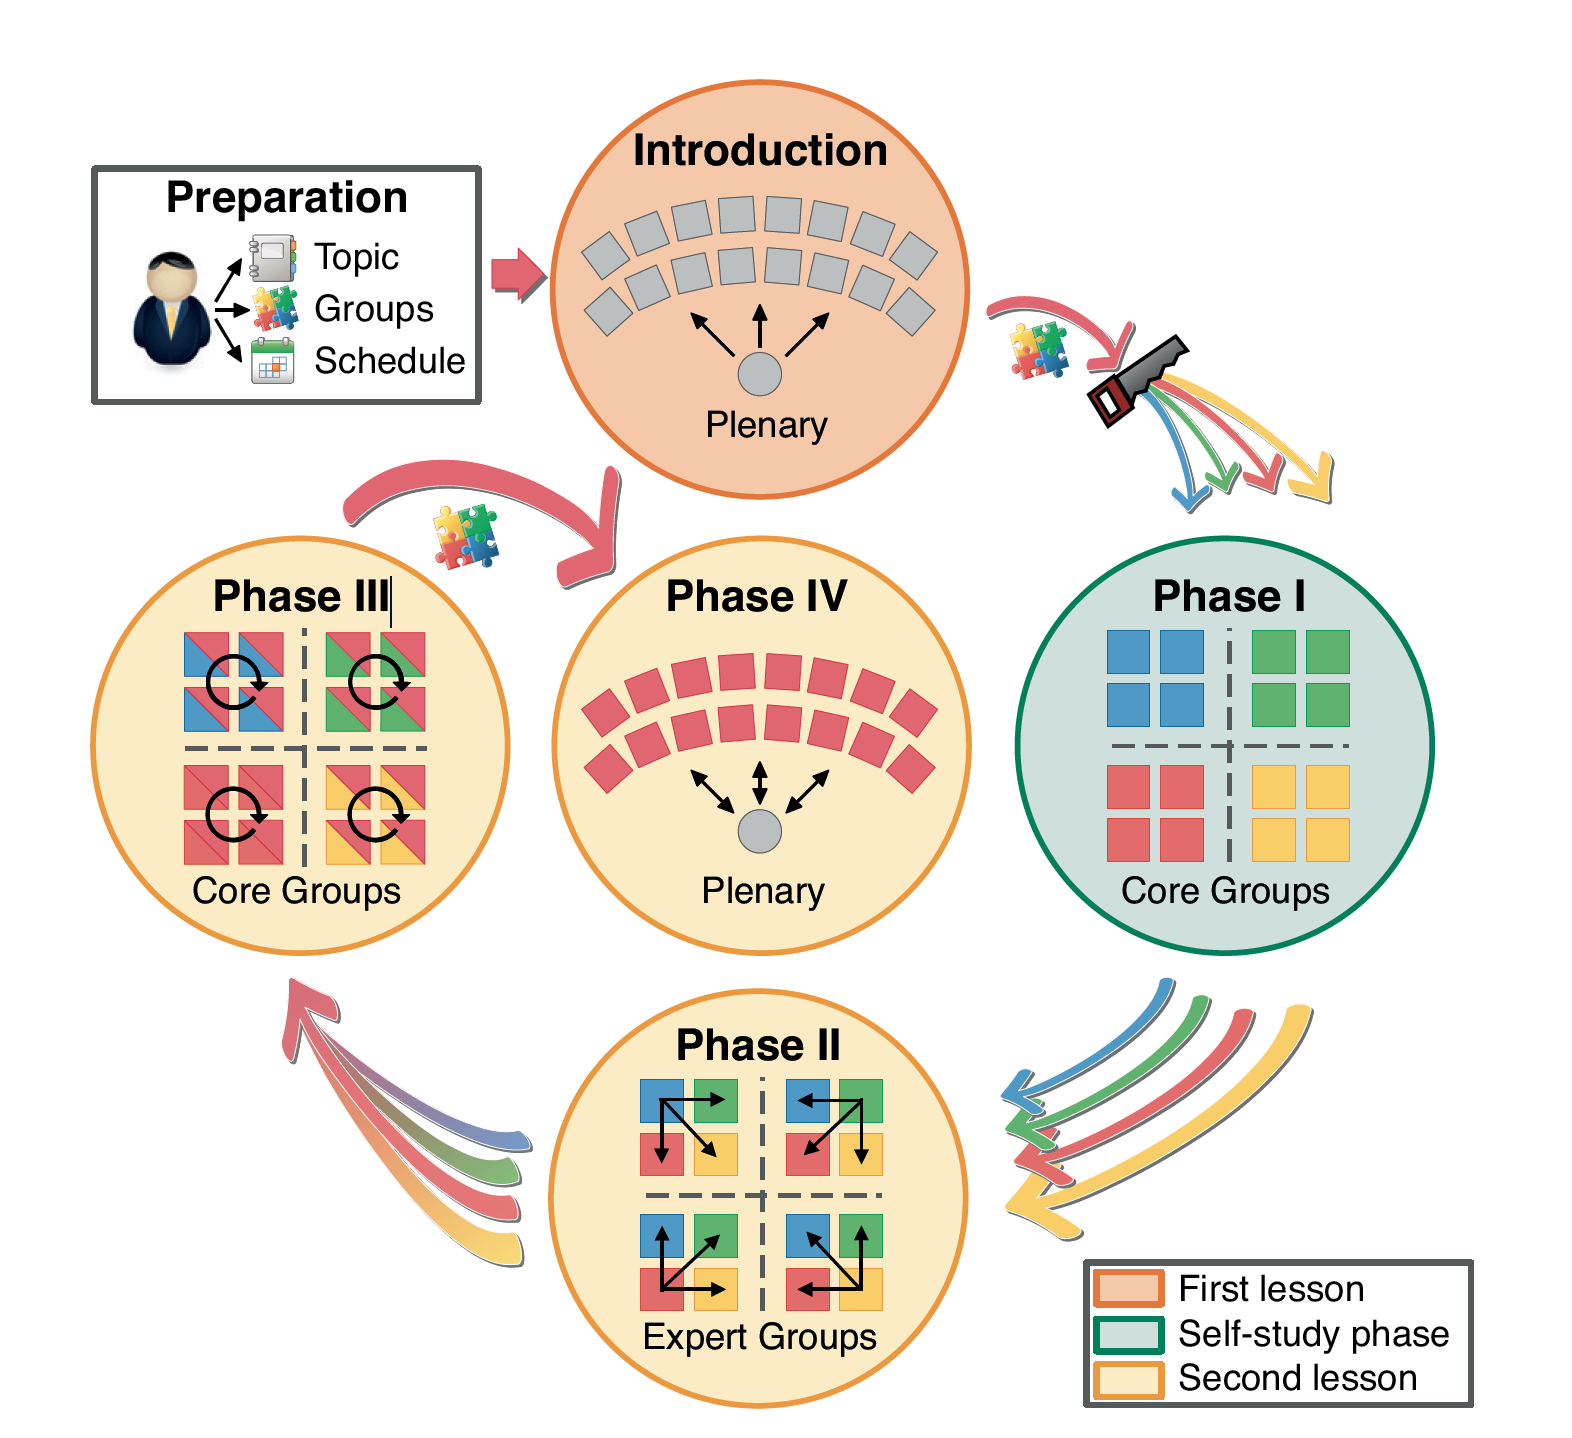 The four phases of the group puzzle as described in the text but presented in a visual representation with different forms and colours for the invidual phases